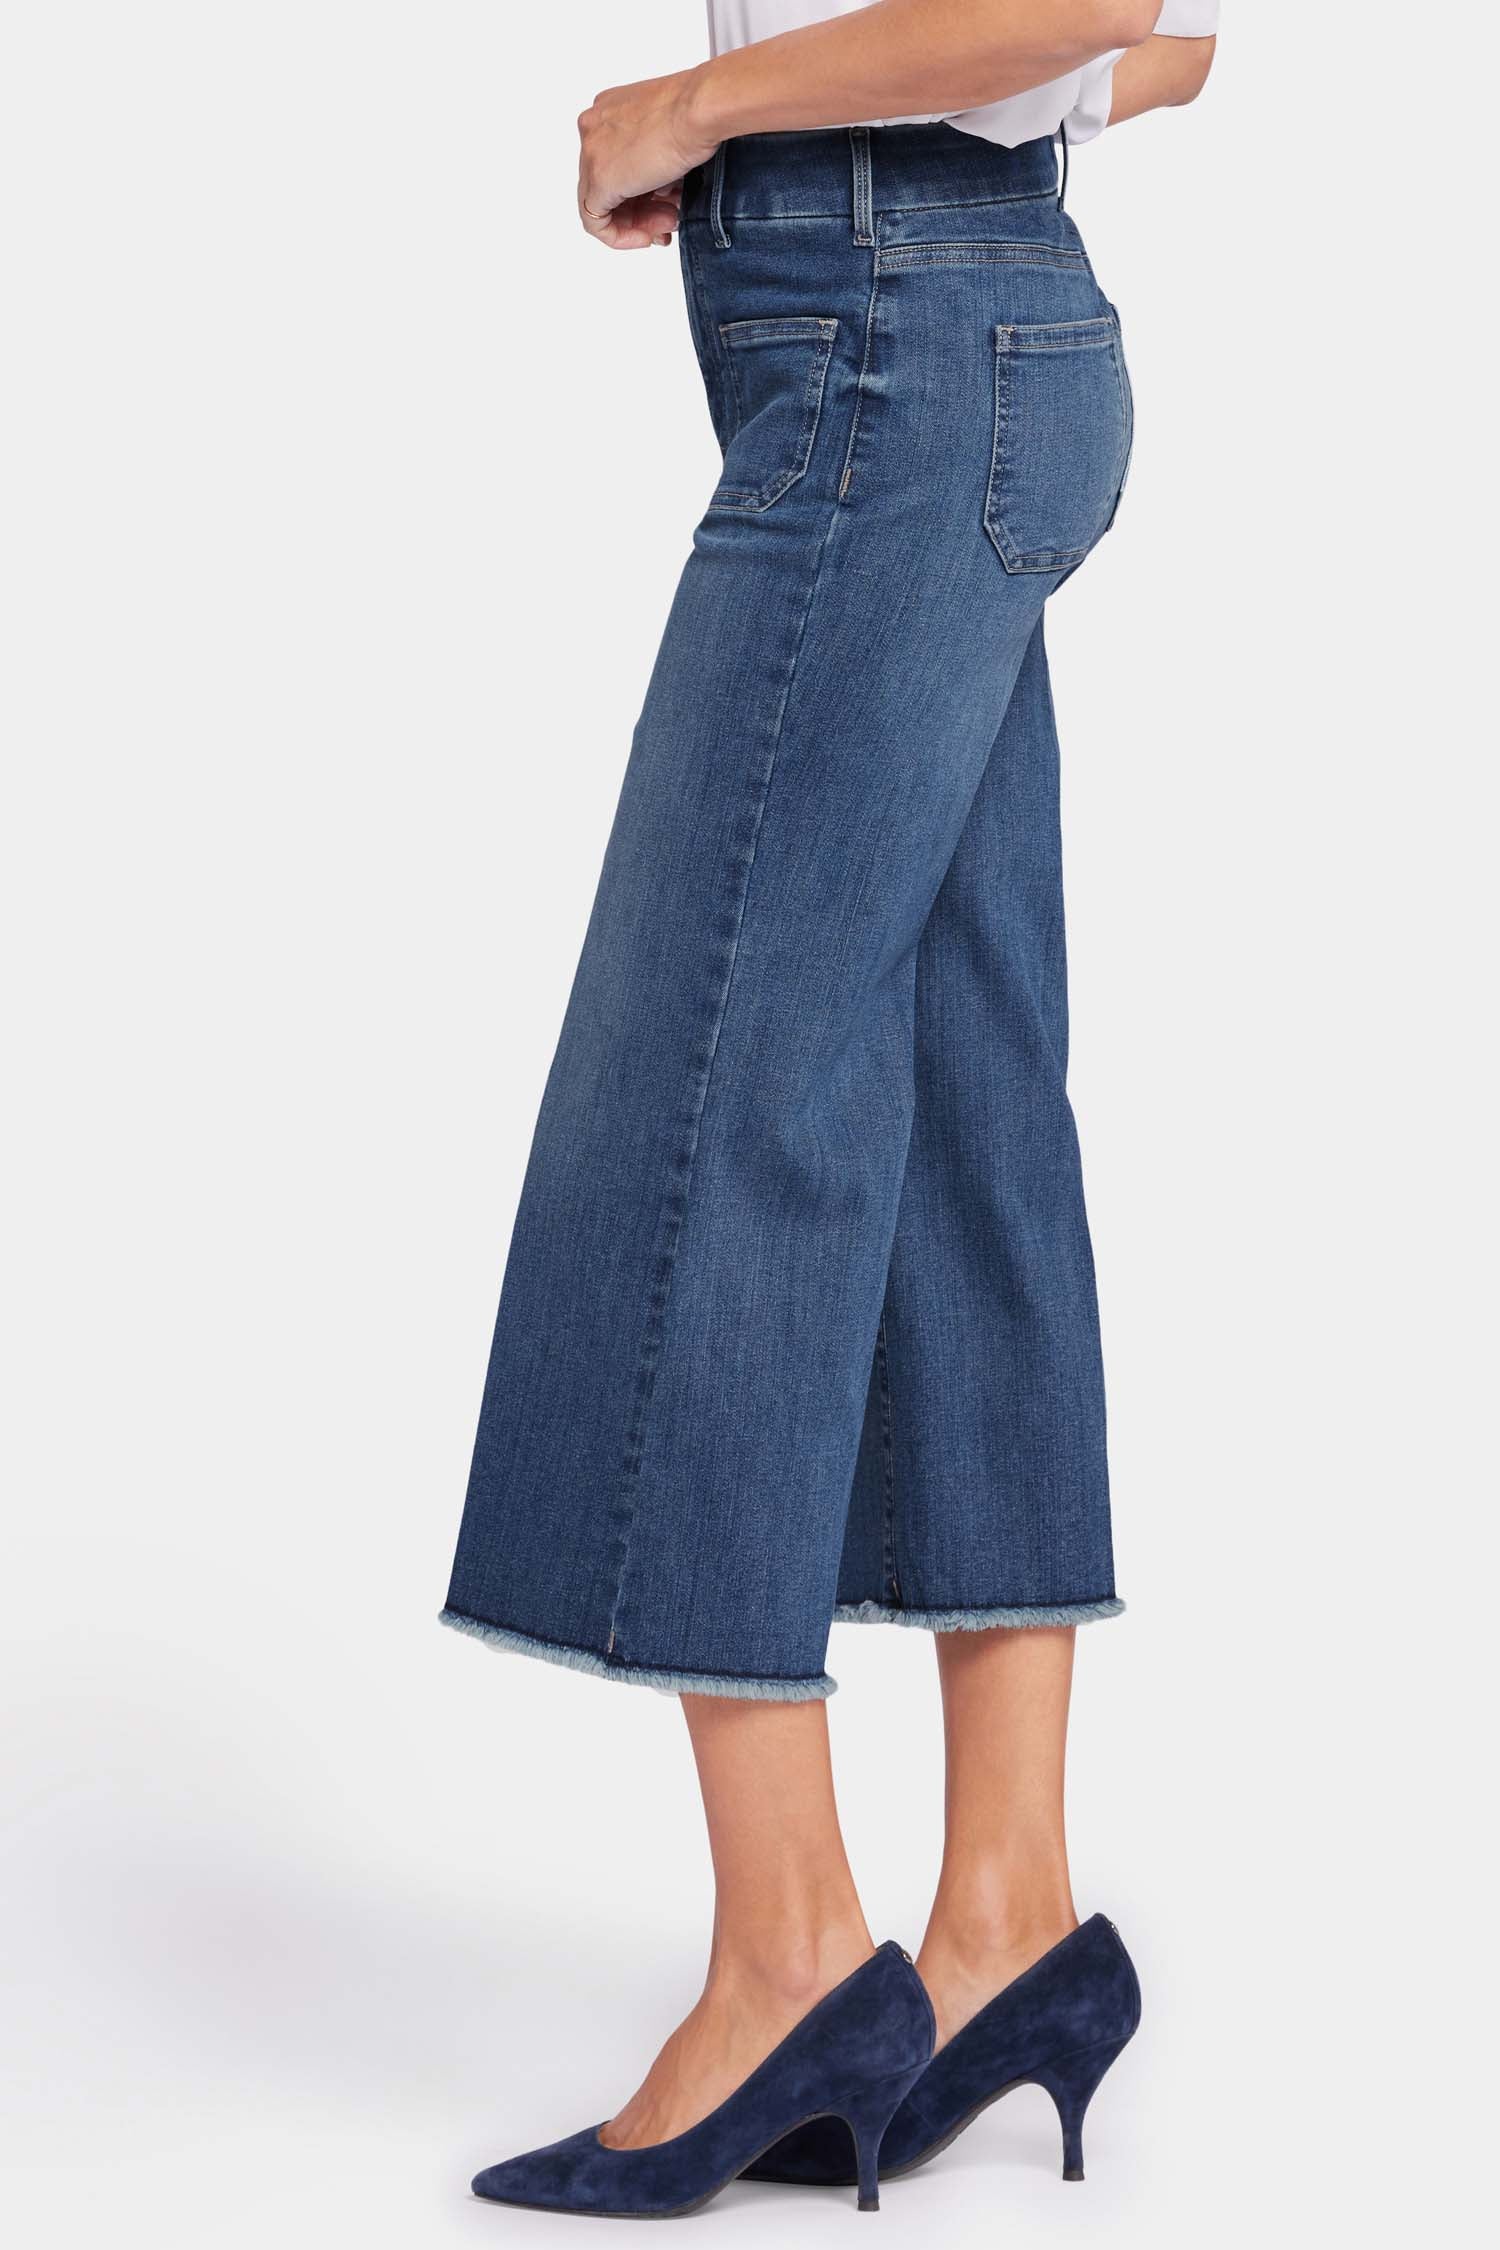 Patchie Wide Leg Capri Jeans In Petite With Frayed Hems - Fanciful Blue